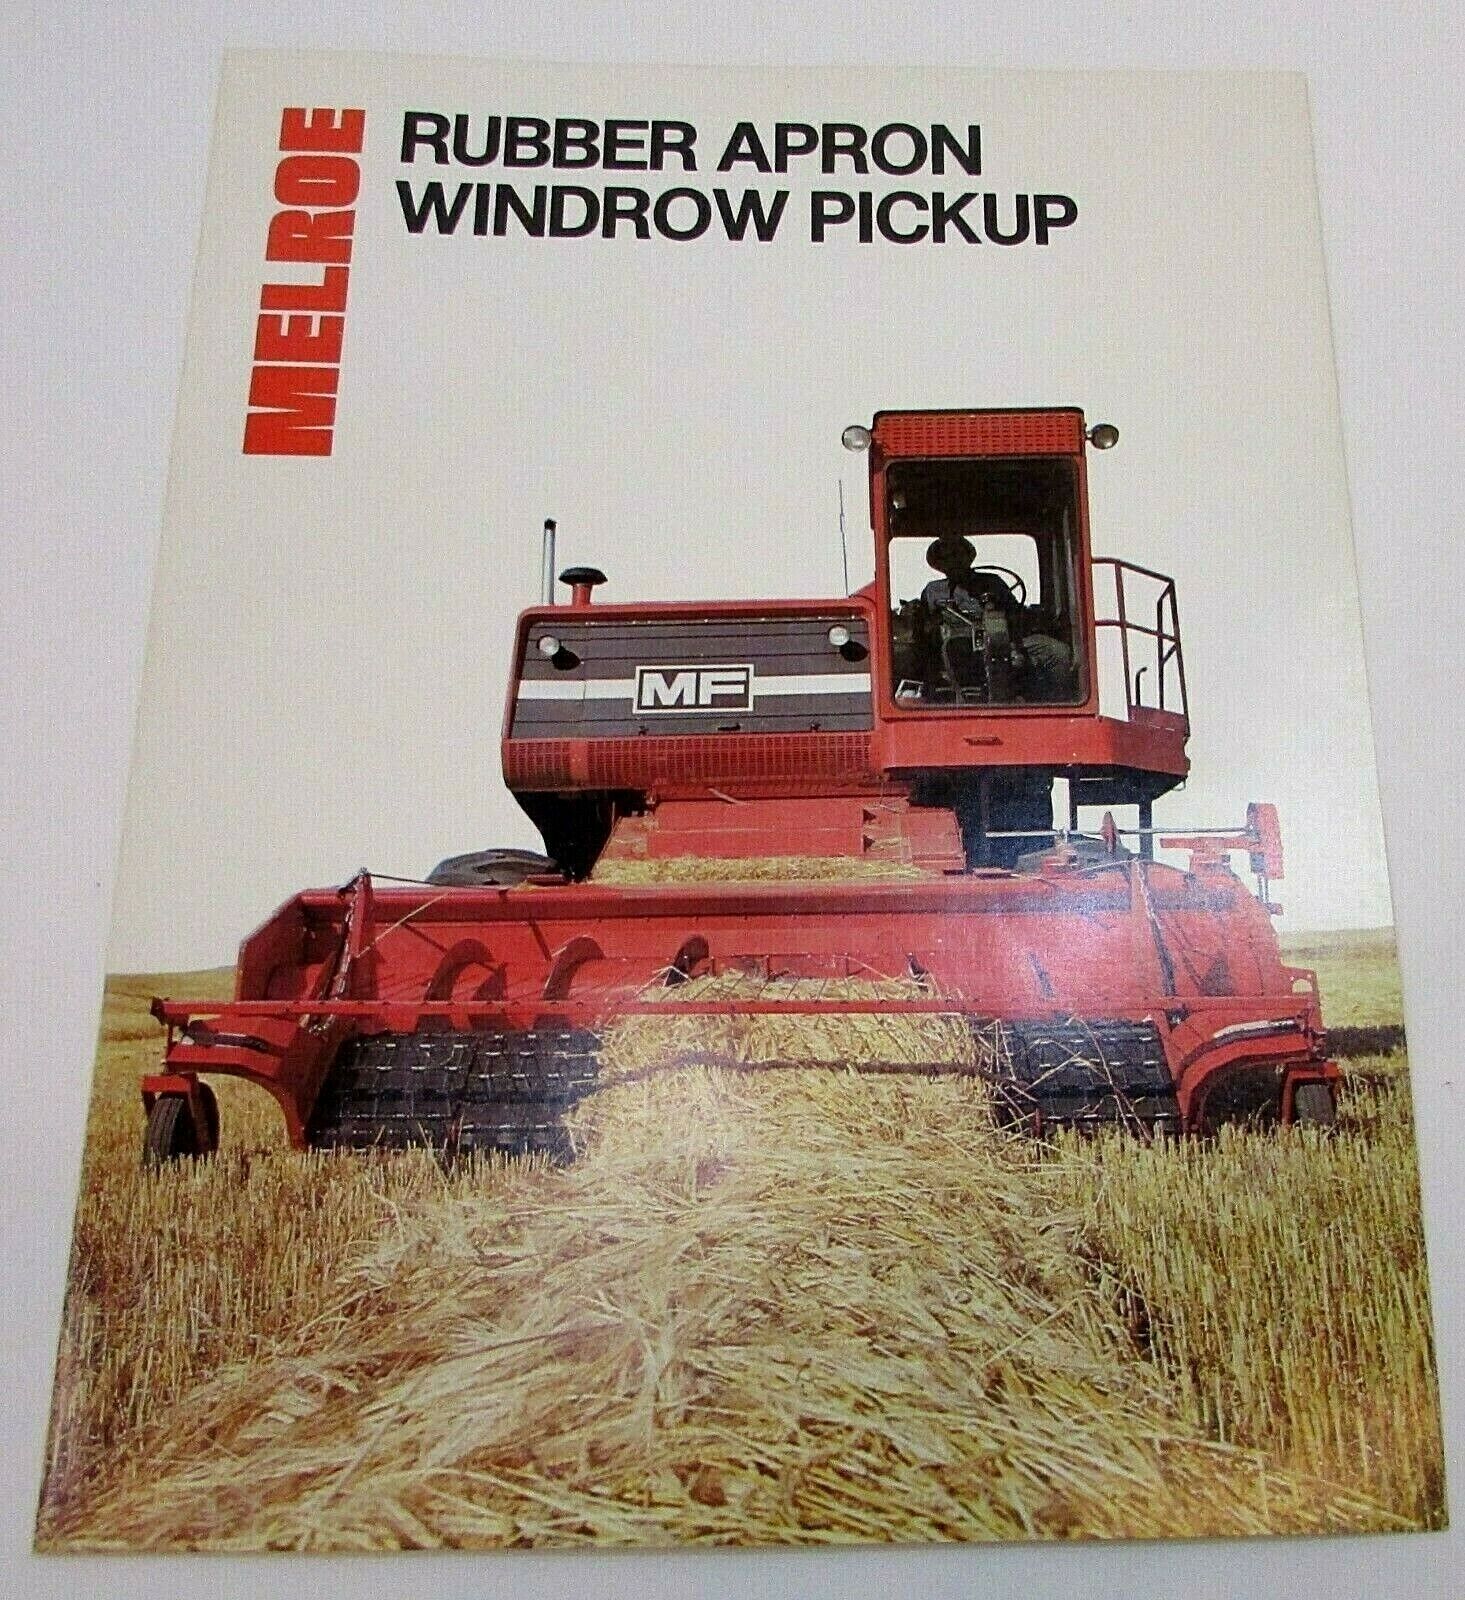 Vintage New 1978 Melroe Rubber Apron Windrow Pickup MF Combine Brochure FREE S/H